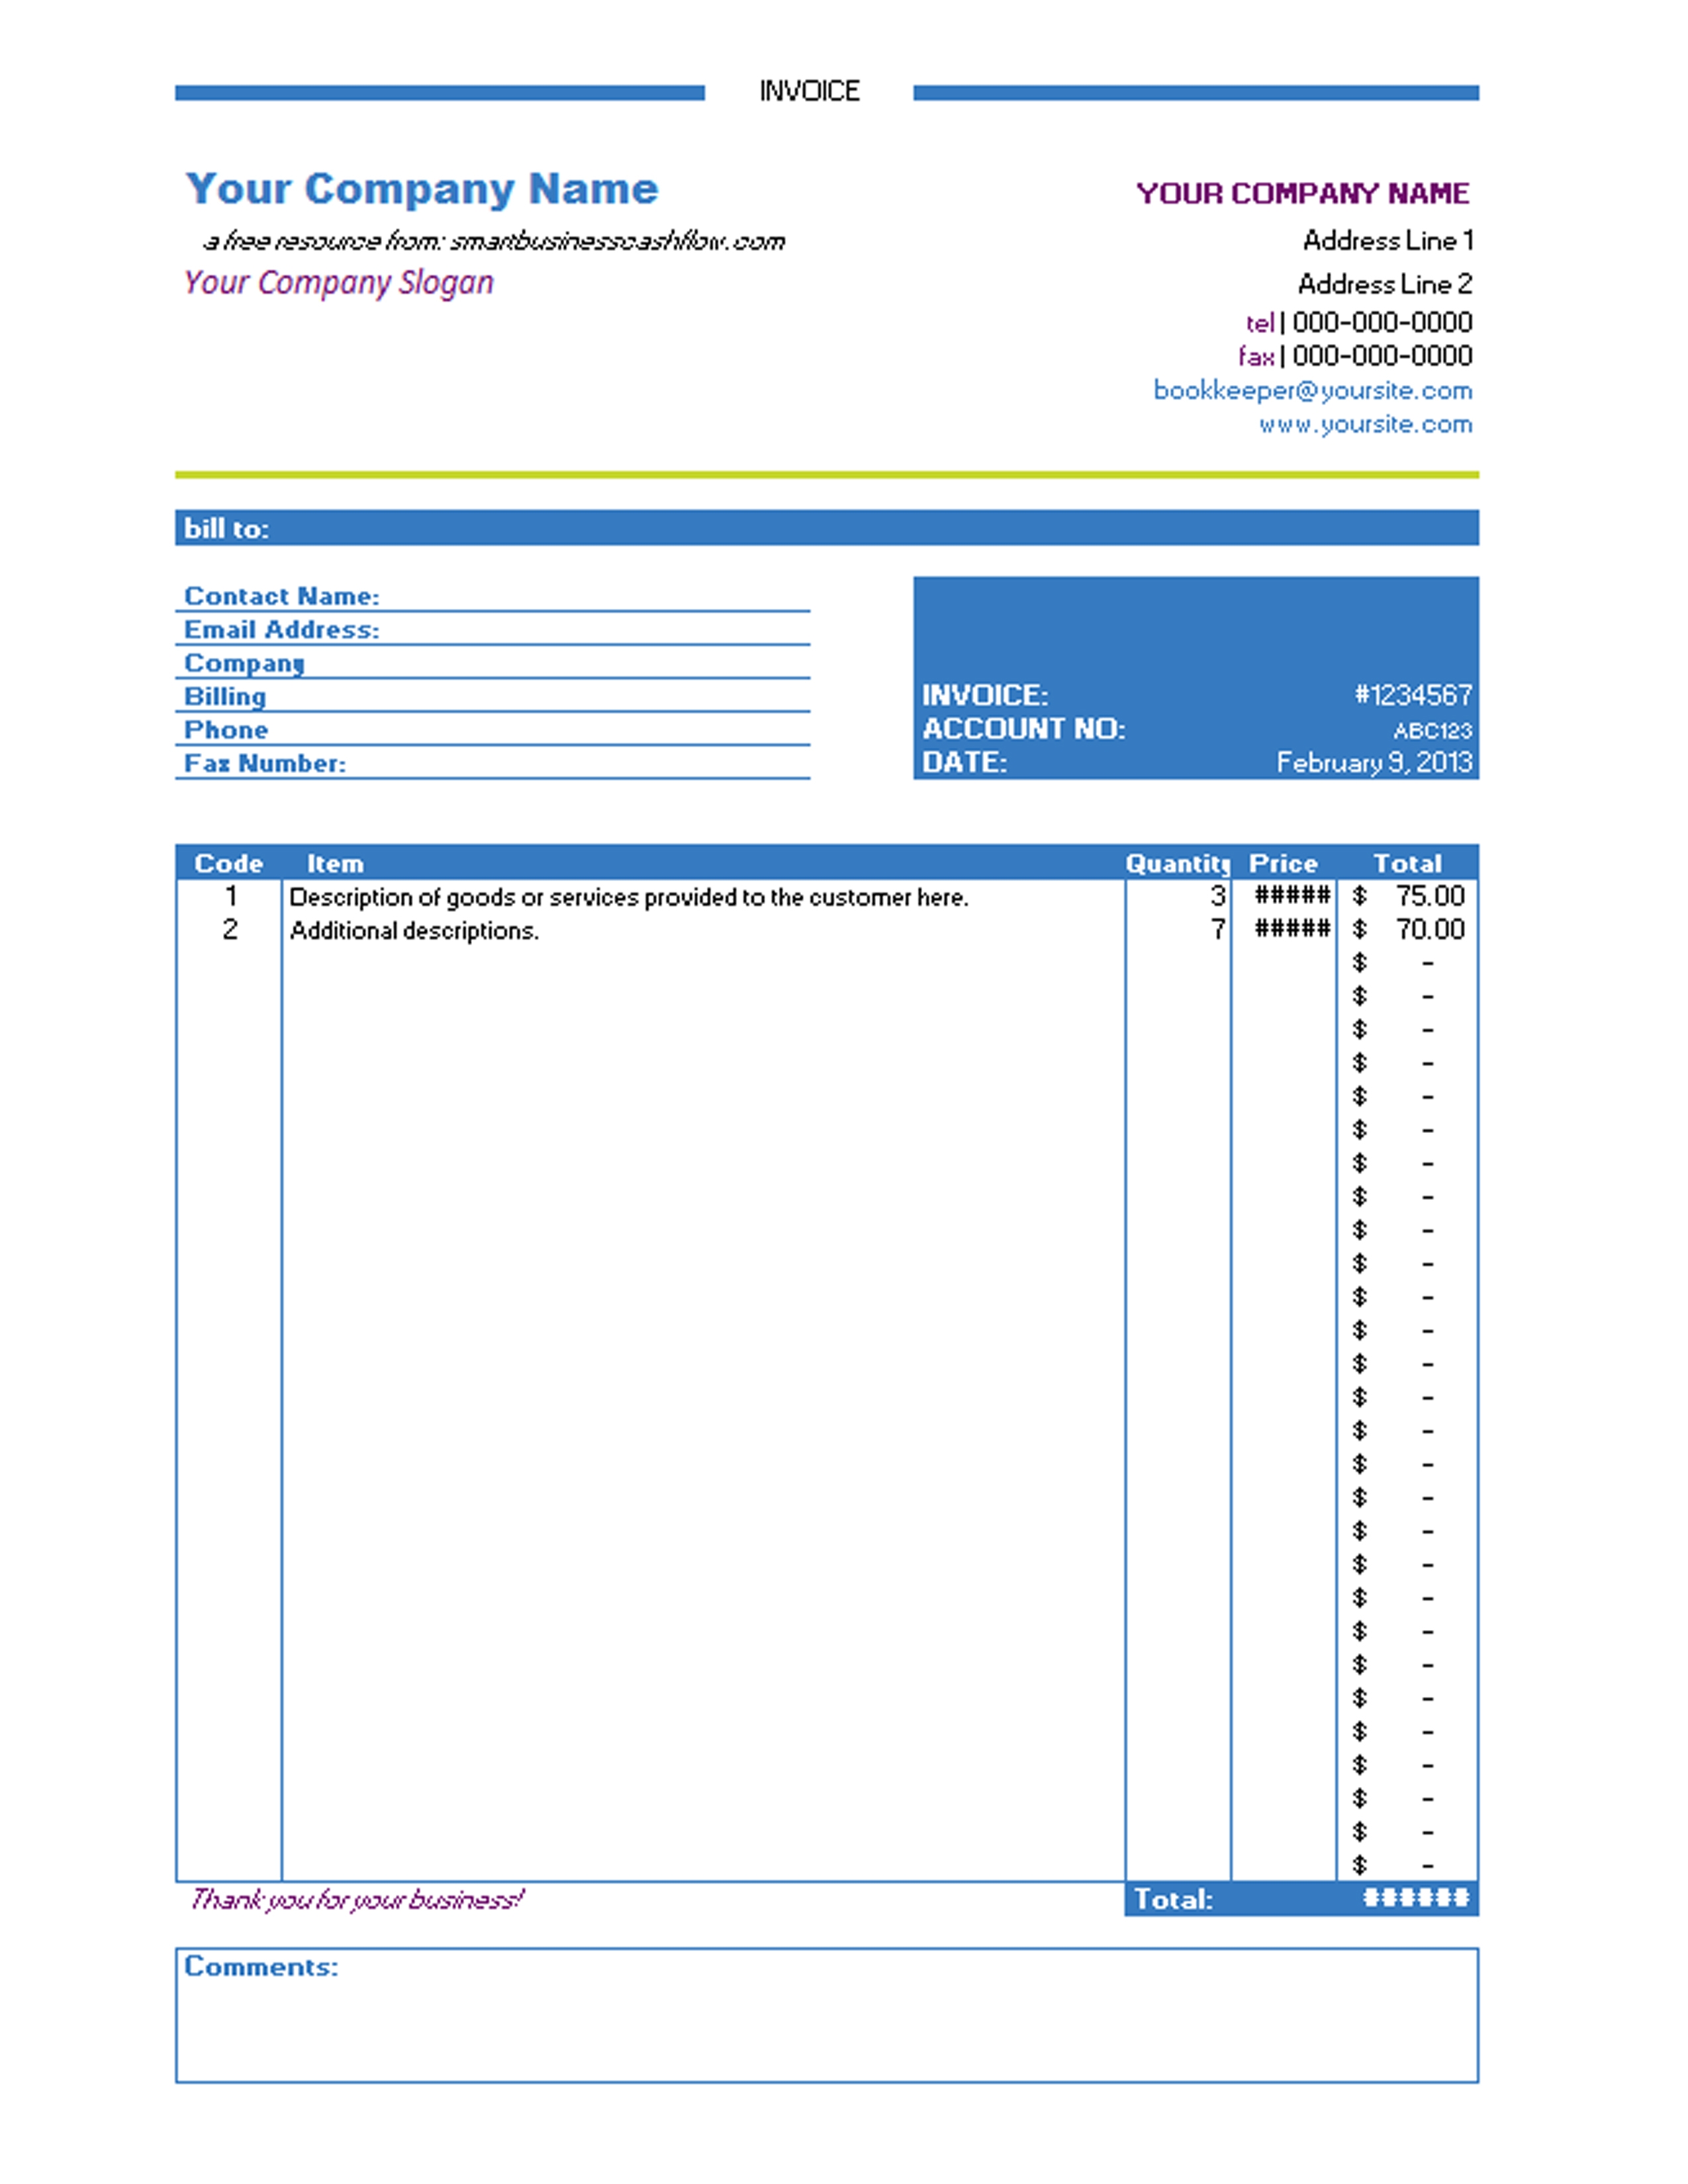 template invoice excel excel invoice templates free download business plan template 2550 X 3300